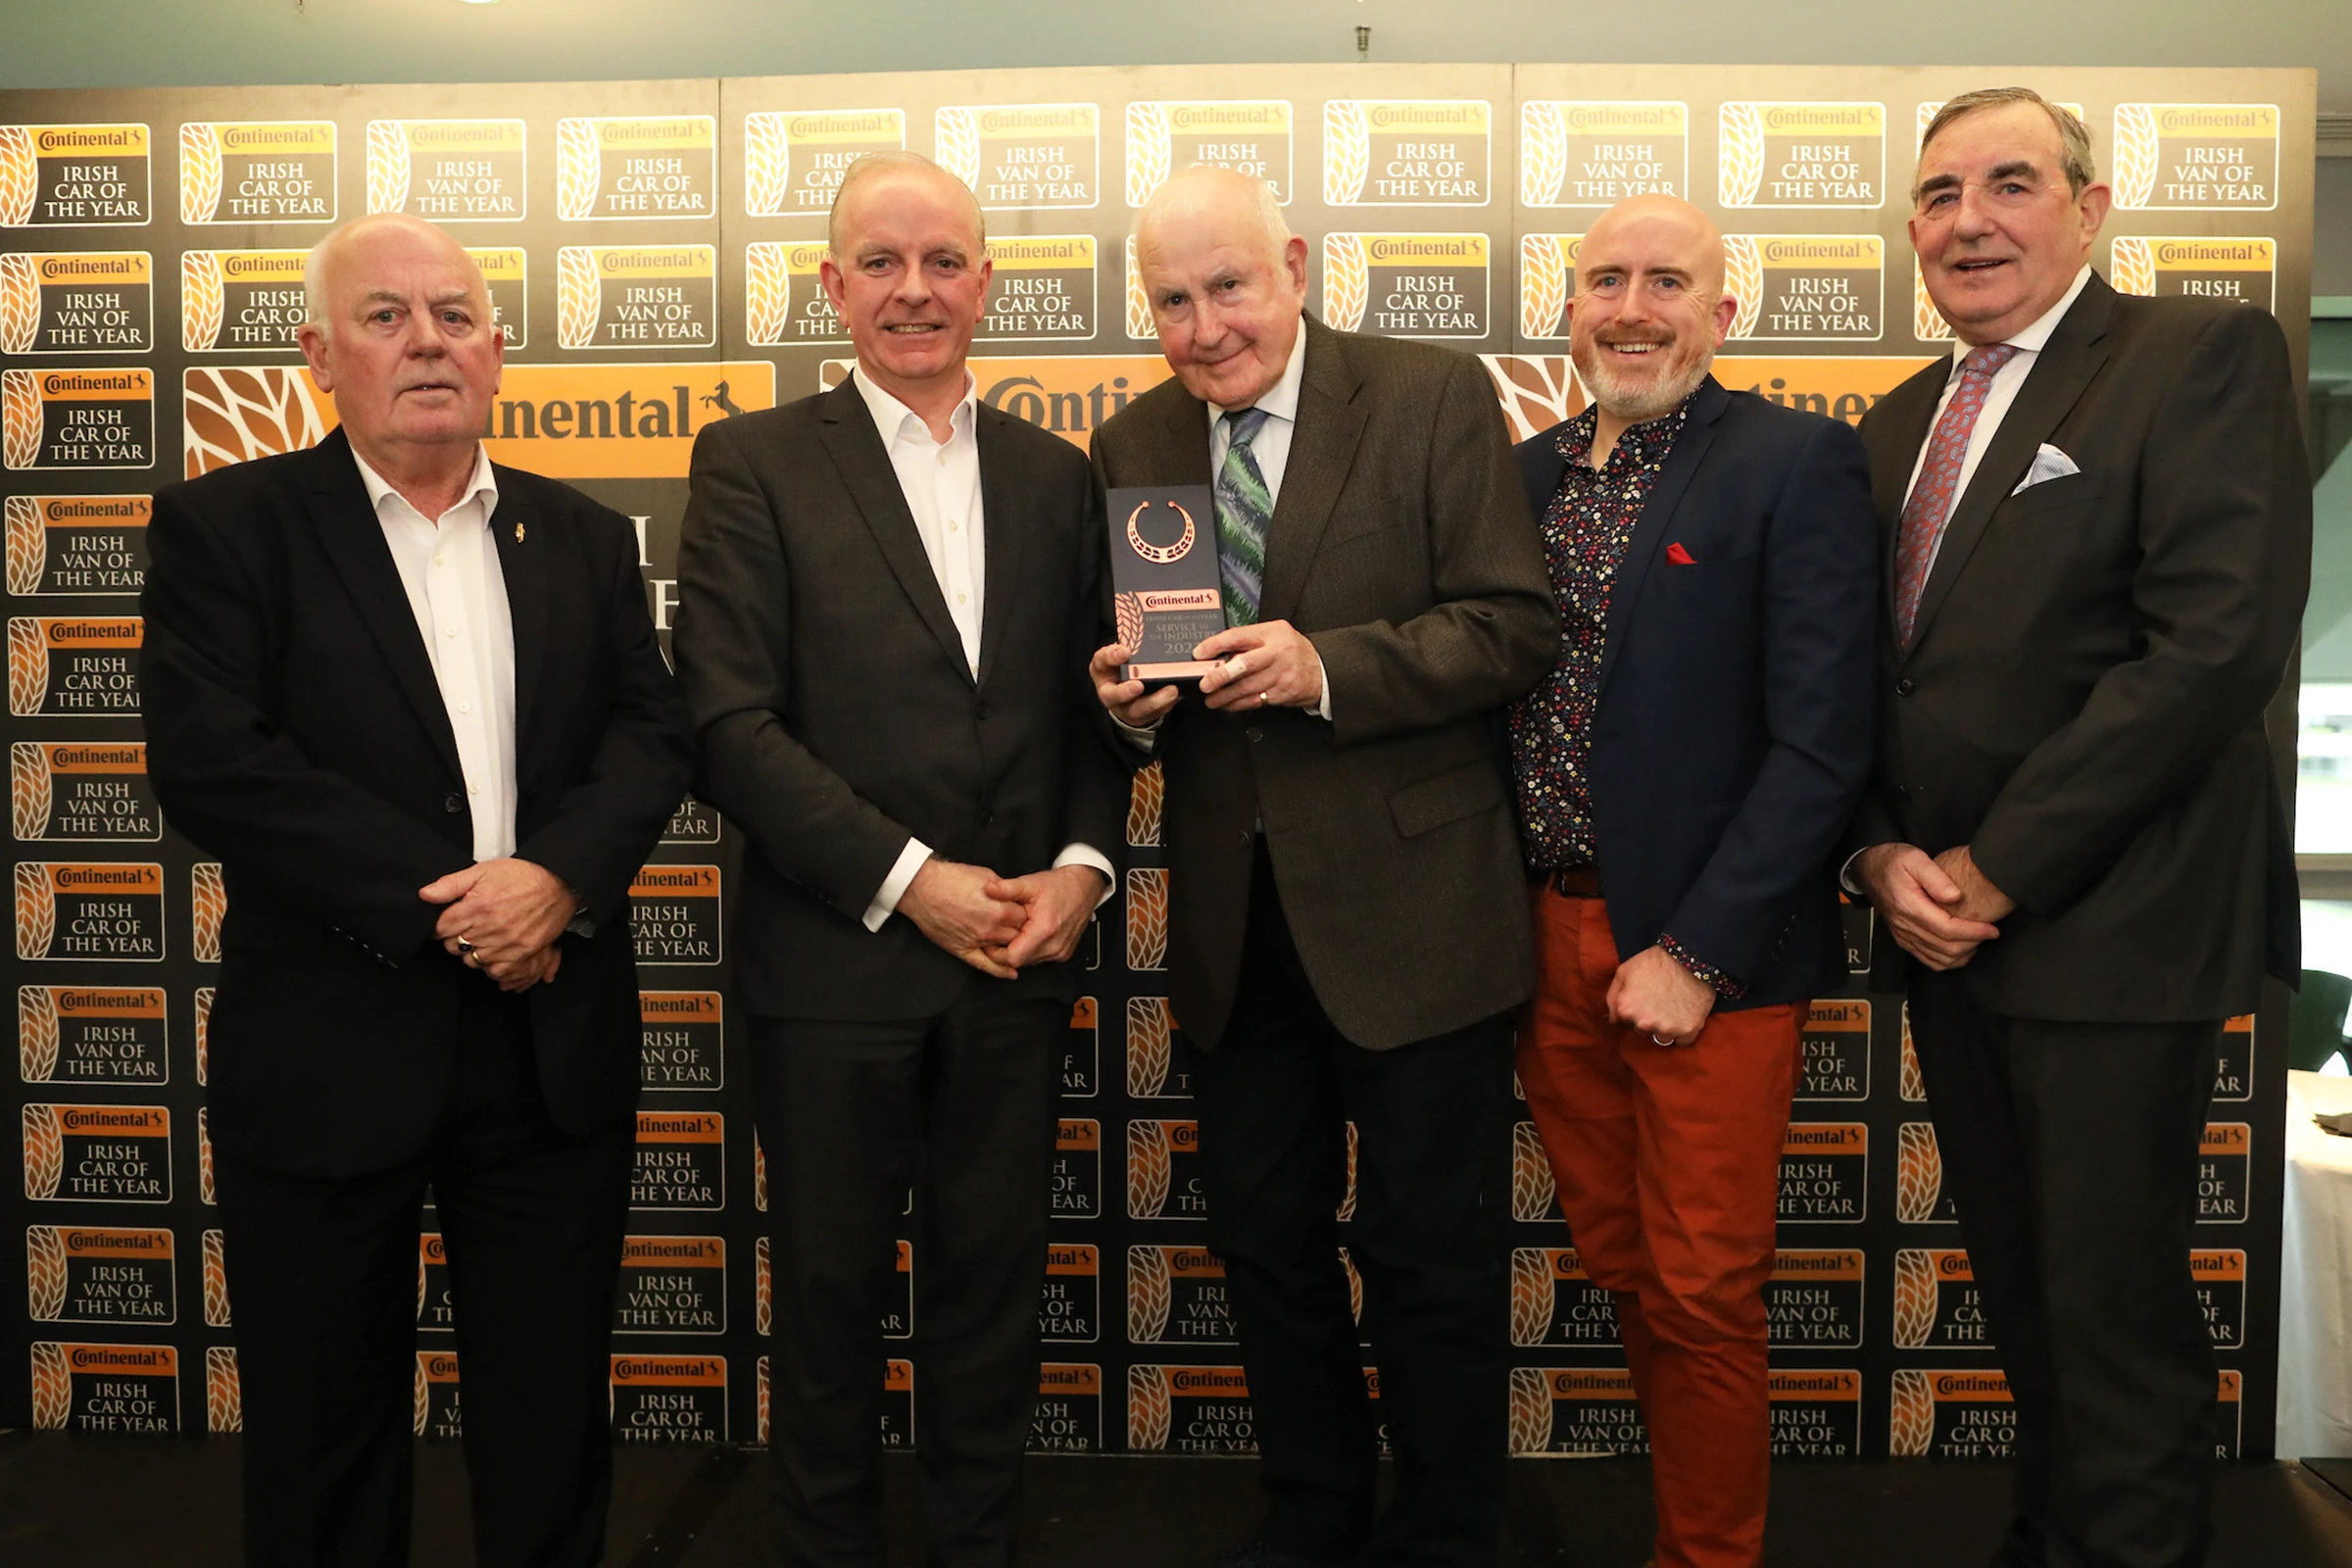 Mercedes-Benz Public Relations Officer, Don Hall, awarded ‘Service to the Industry’ at Irish Van of the Year. Group picture caption: Anthony Conlon, Irish Van of the Year Committee, Tom Dennigan, Continental Tyres Ireland, Don Hall, Hall Public Relations, Darragh Keany, Irish Car of the Year Committee, Tony Toner, Irish Van of the Year Committee.